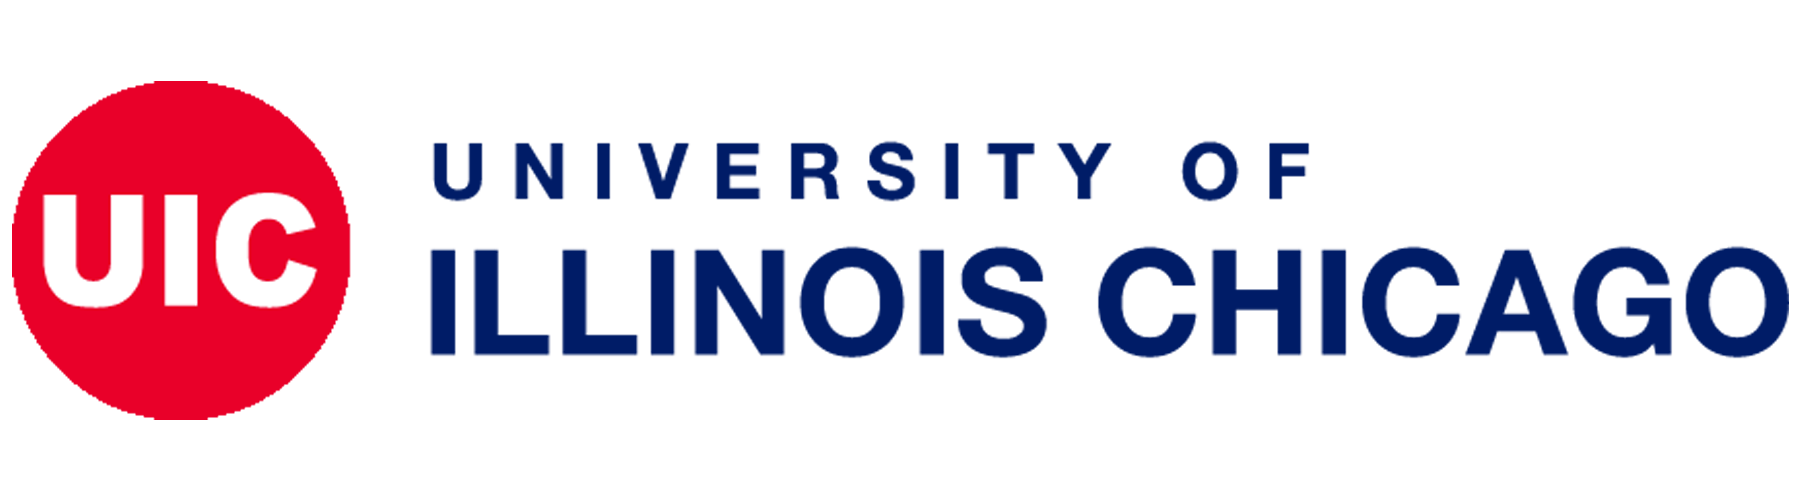  University of Illinois at Chicago - Human Resources PHD